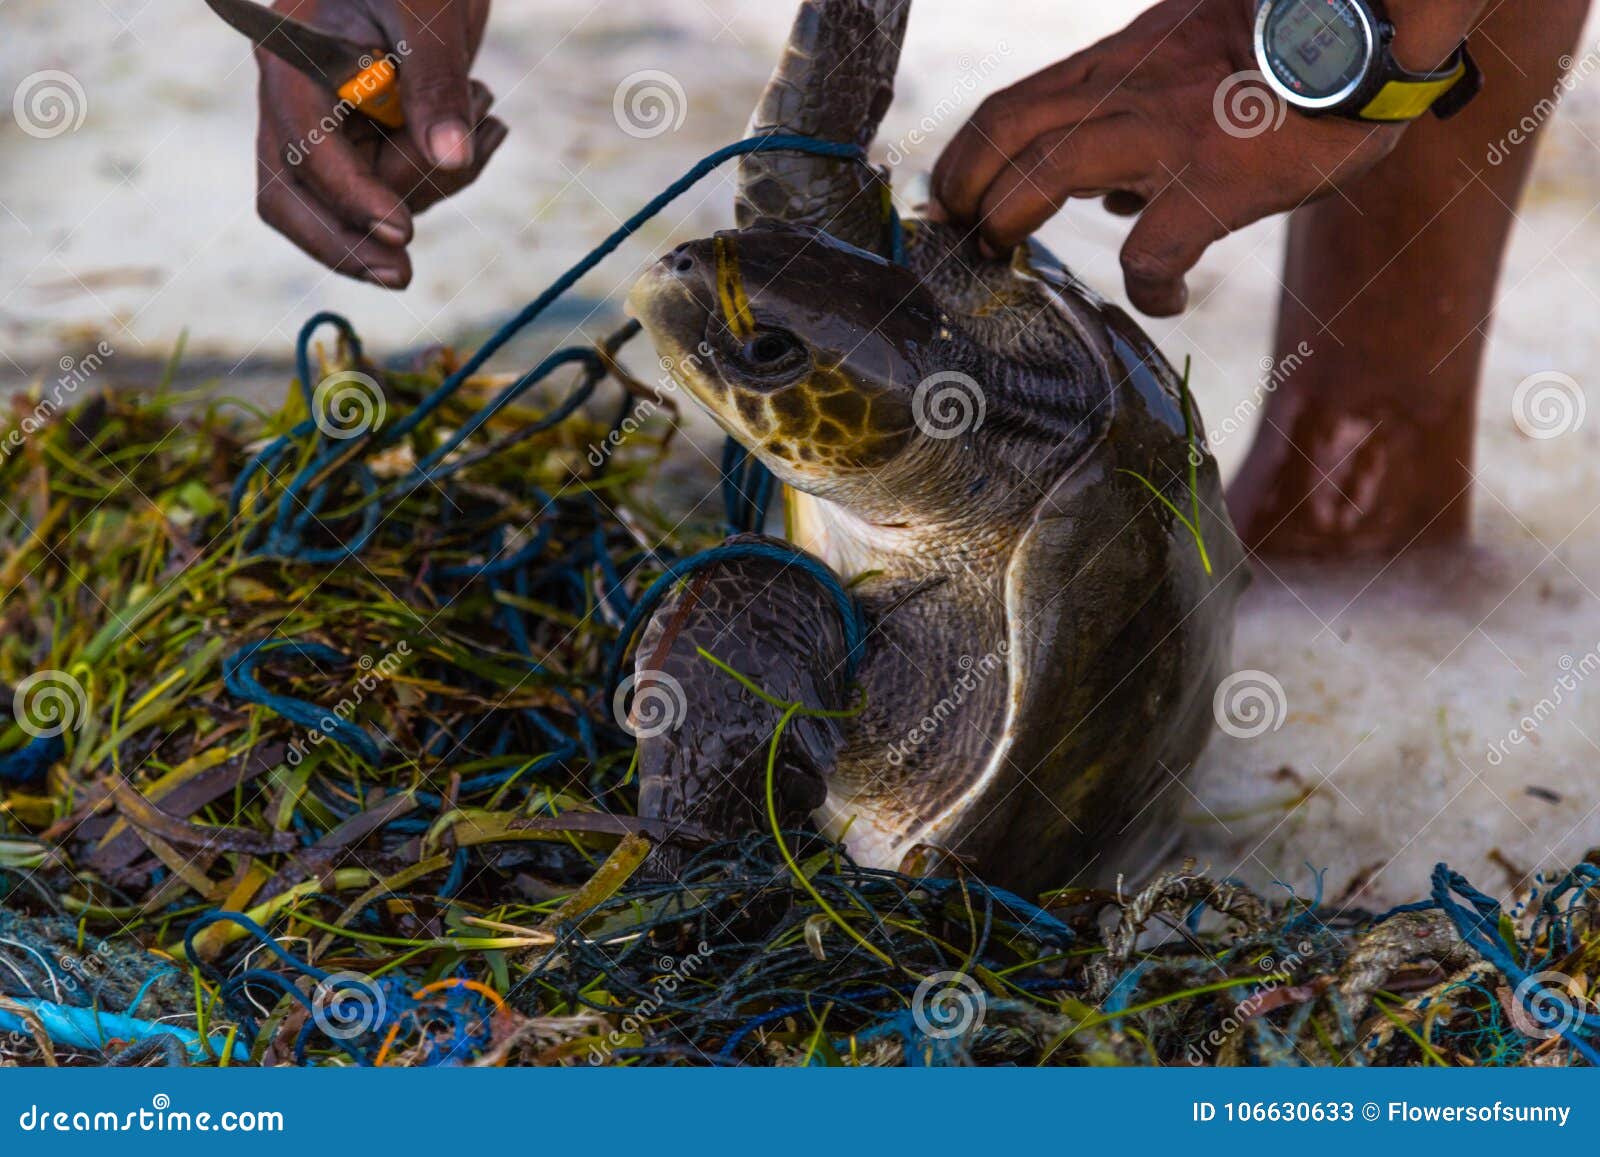 Sea Turtle Save in Maldives Island, Fishing Net Trapped Animal, Save Planet,  Go Green Concept Stock Image - Image of ecological, ecology: 106630633